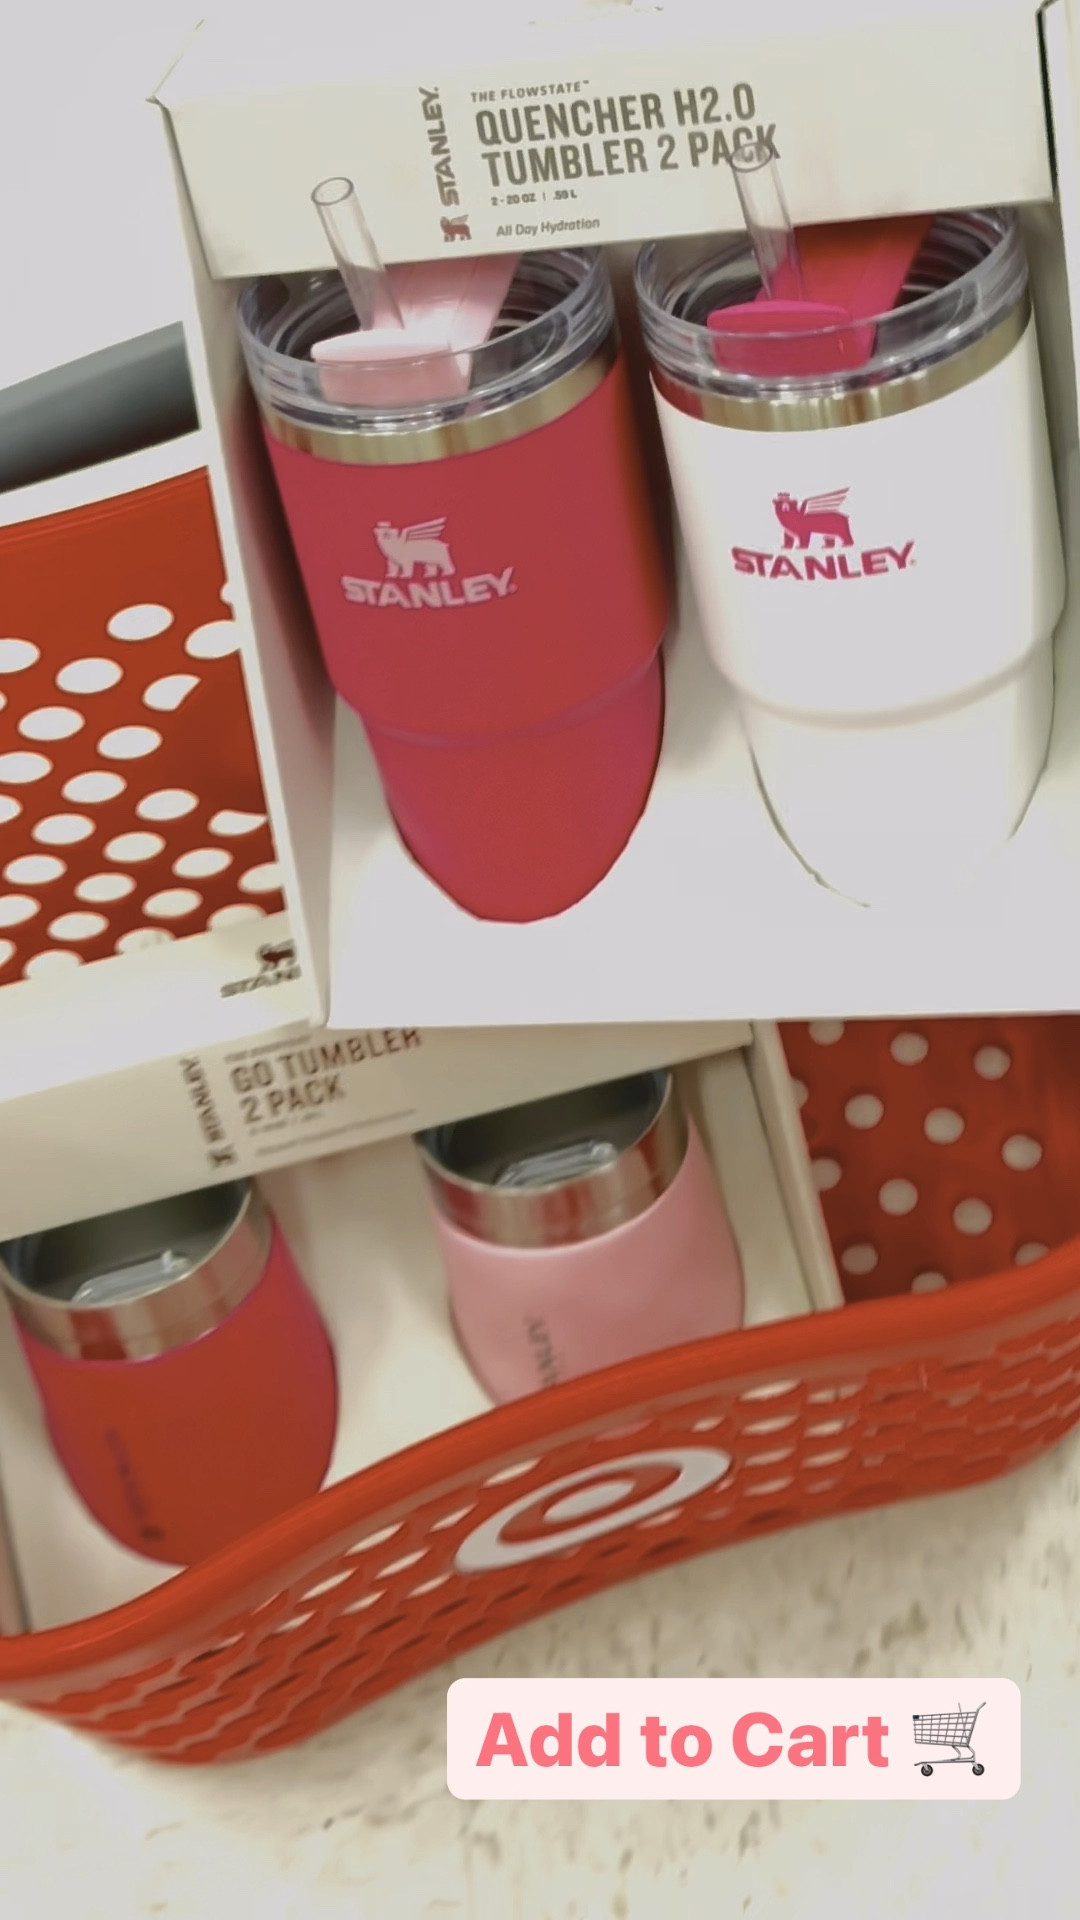 Stanley 2pk 20oz Stainless Steel H2.0 Flowstate Quencher Tumblers - Pink  Vibes/white : Target